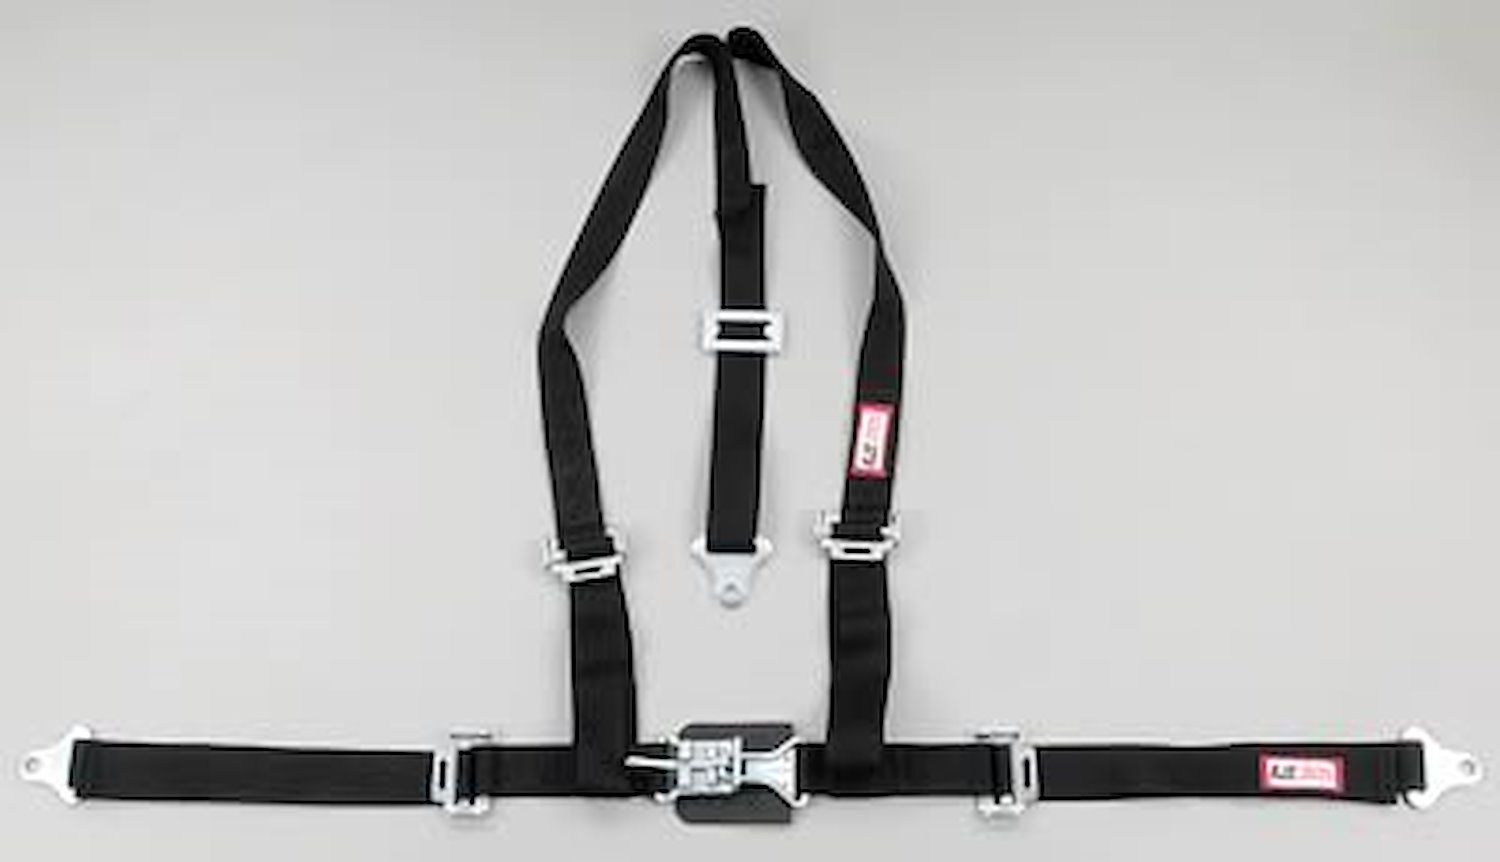 NON-SFI L&L HARNESS 2 PULL UP Lap Belt SNAP SEWN IN 2 S.H. INDIVIDUAL FLOOR Mount w/STERNUM STRAP WRAP/BOLT ORANGE